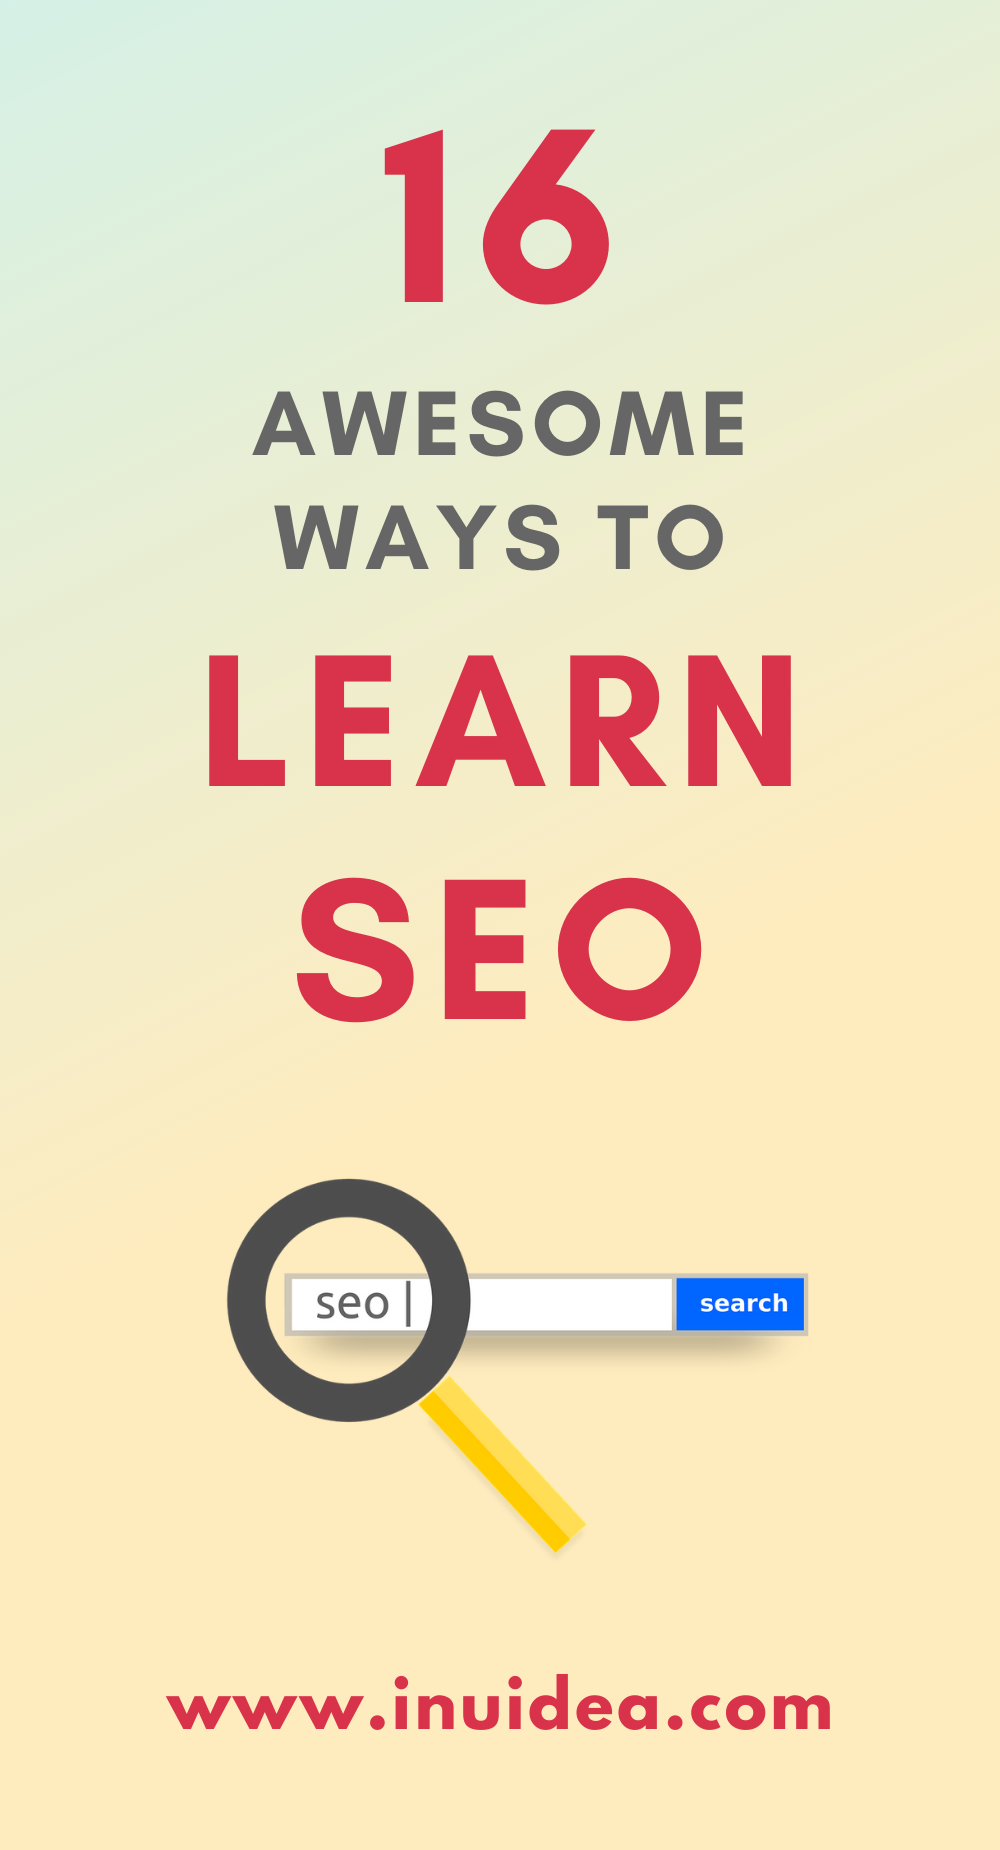 16 Awesome Ways To Learn SEO